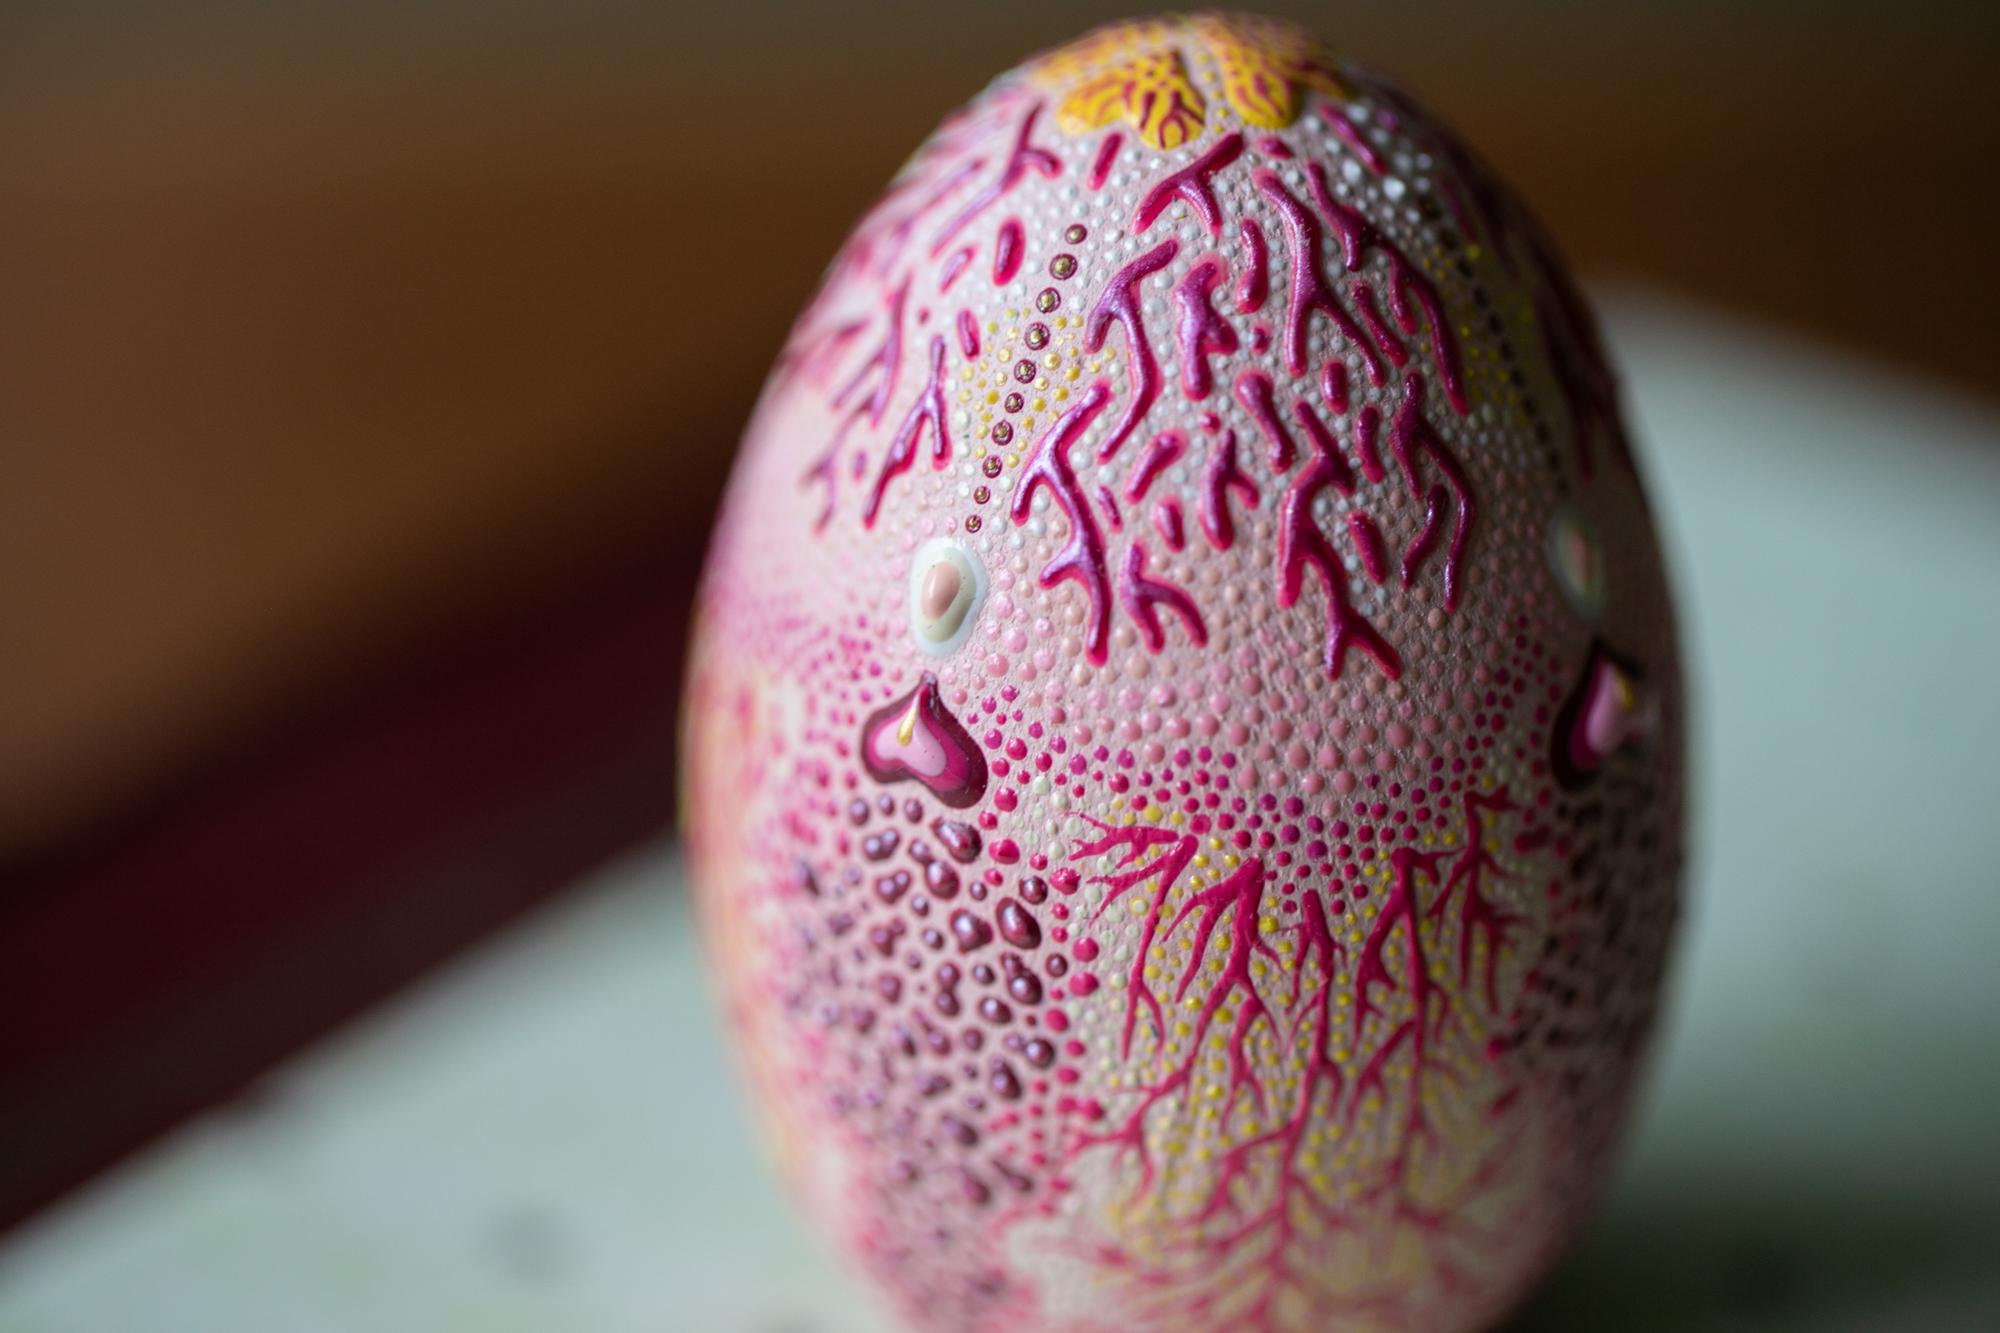 This abstract egg sculpture titled 